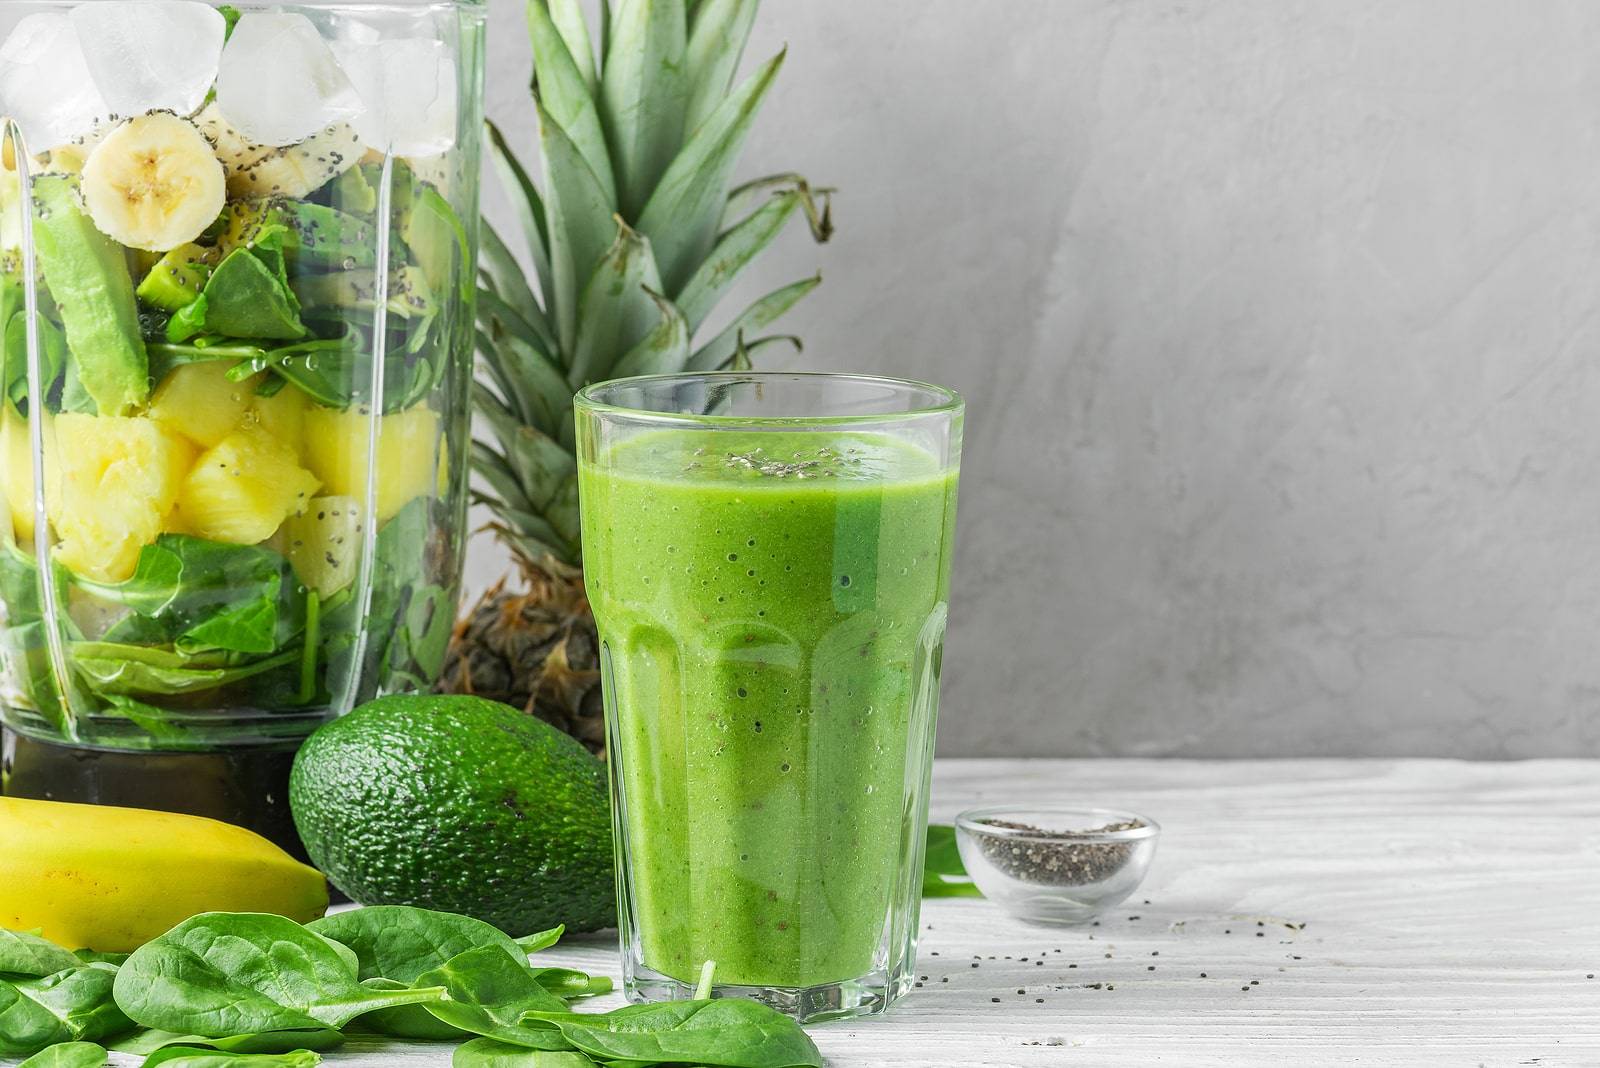 Top 7 Superfoods to Add to your Smoothie